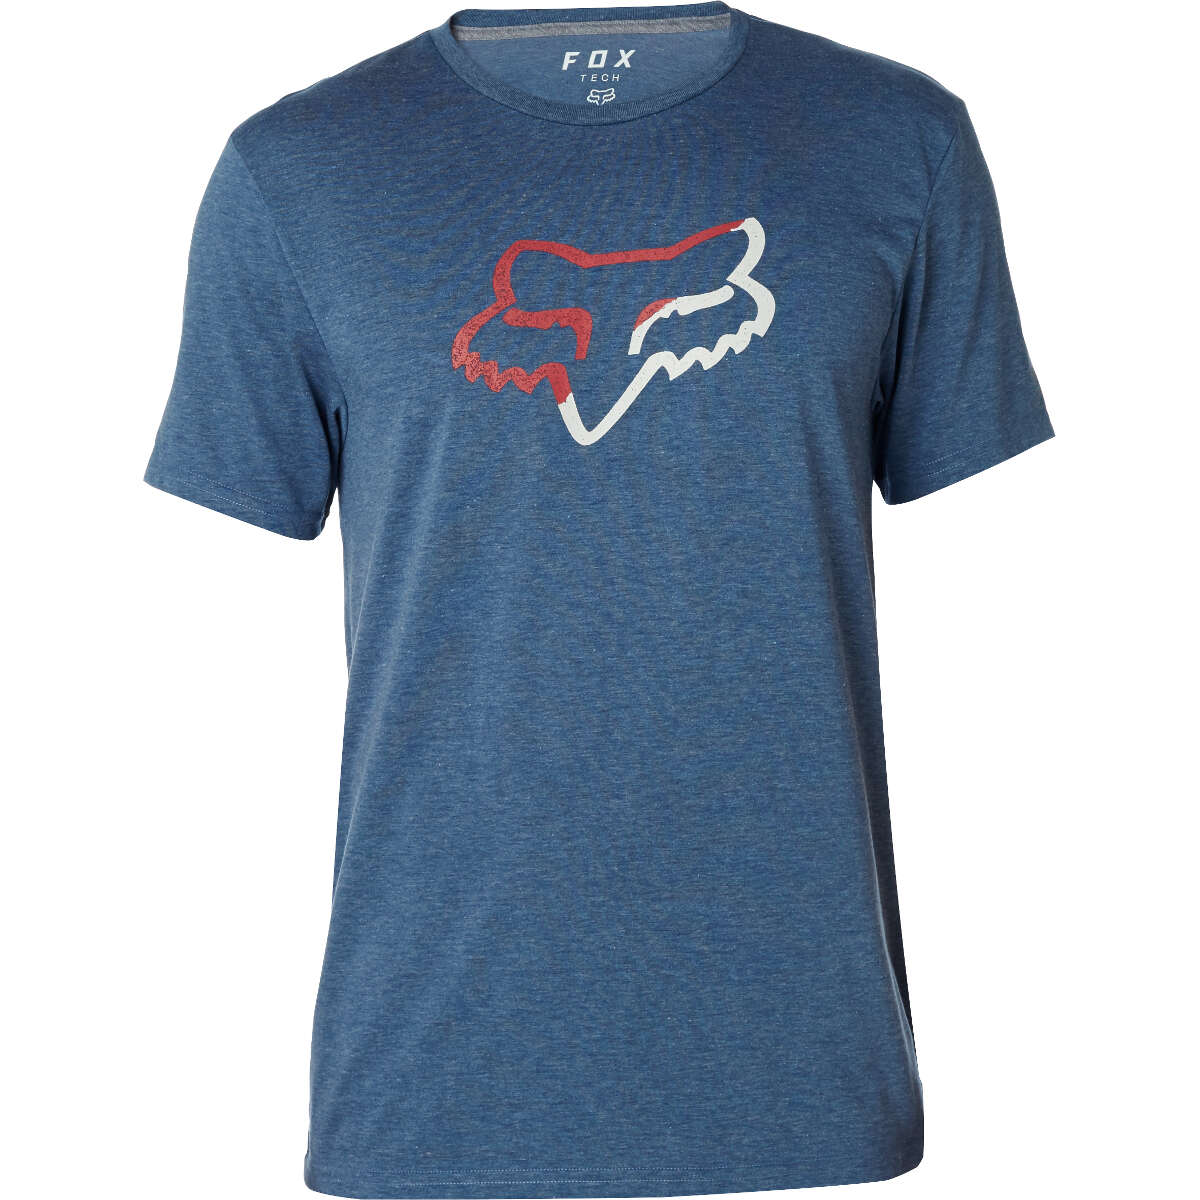 Fox T-Shirt Tech Planned Out Heather Navy